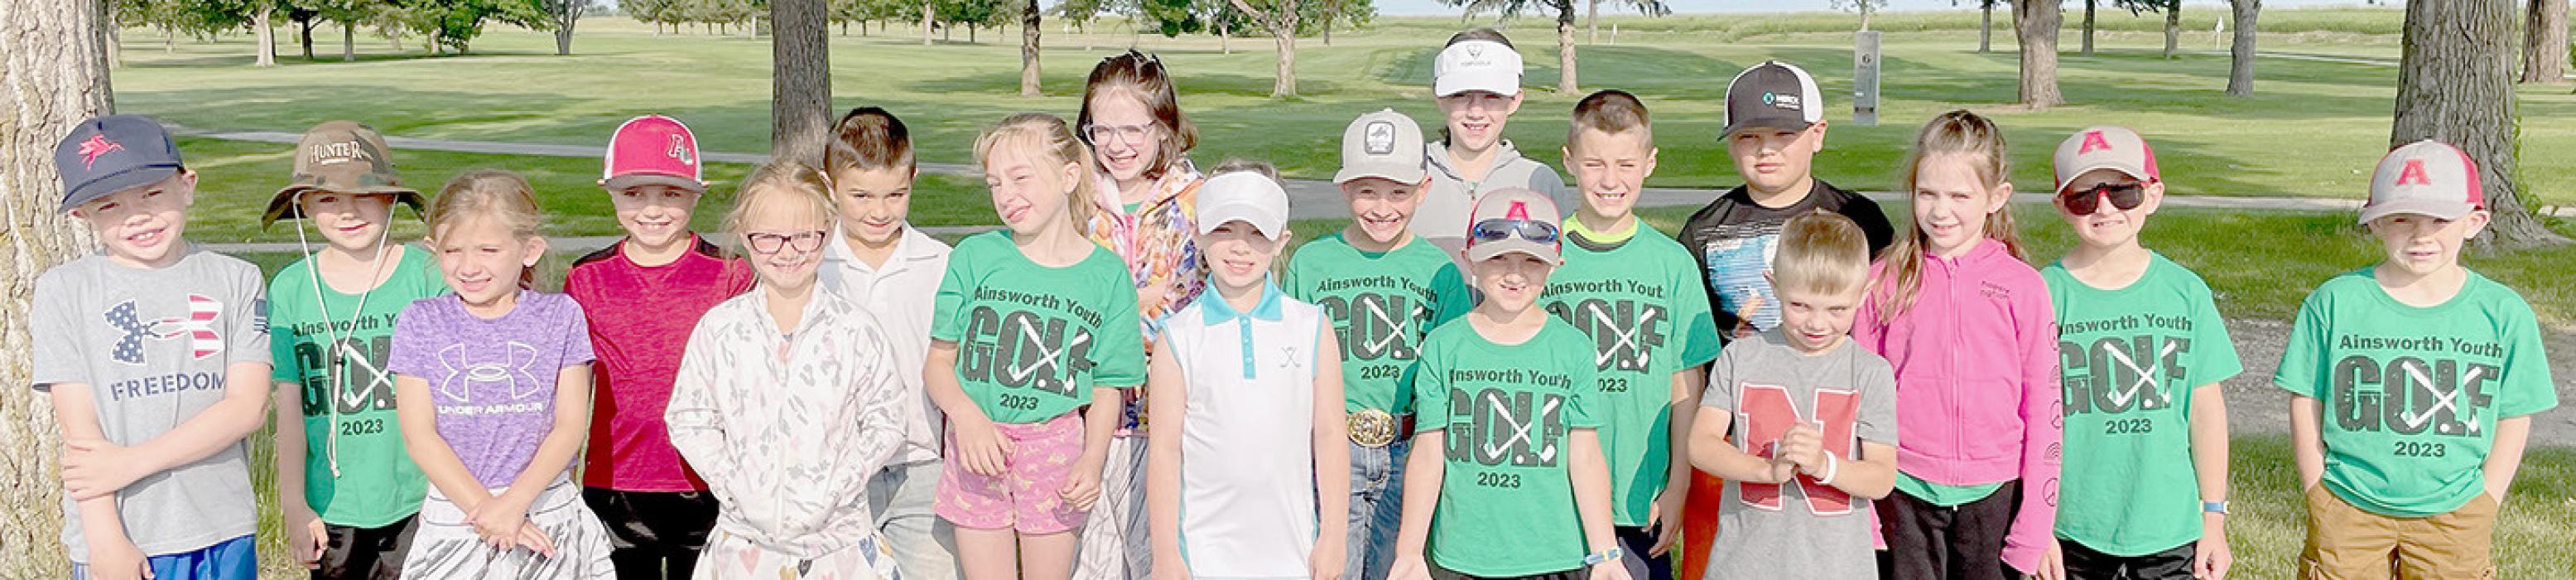 Participating in the 2023 K, 1st and 2nd Grade Group in the Ainsworth Youth Golf were (Front Row - Left to Right): Mindee King, Gracyn Peterson, Mallory Porter, Sophia Magill, Bentley Mashburn and Reegin Alberts; (Middle Row Left to Right): Code Steinhauser, Leon Carpenter, Duke Dailey, Briggs Hladky, Blake Sedlacek, Rowan Alberts, Henry Mashburn and Blake Winters; (Back Row - Left to Right): Tegan Alberts, Sutton Owen and Milo Schmitz.